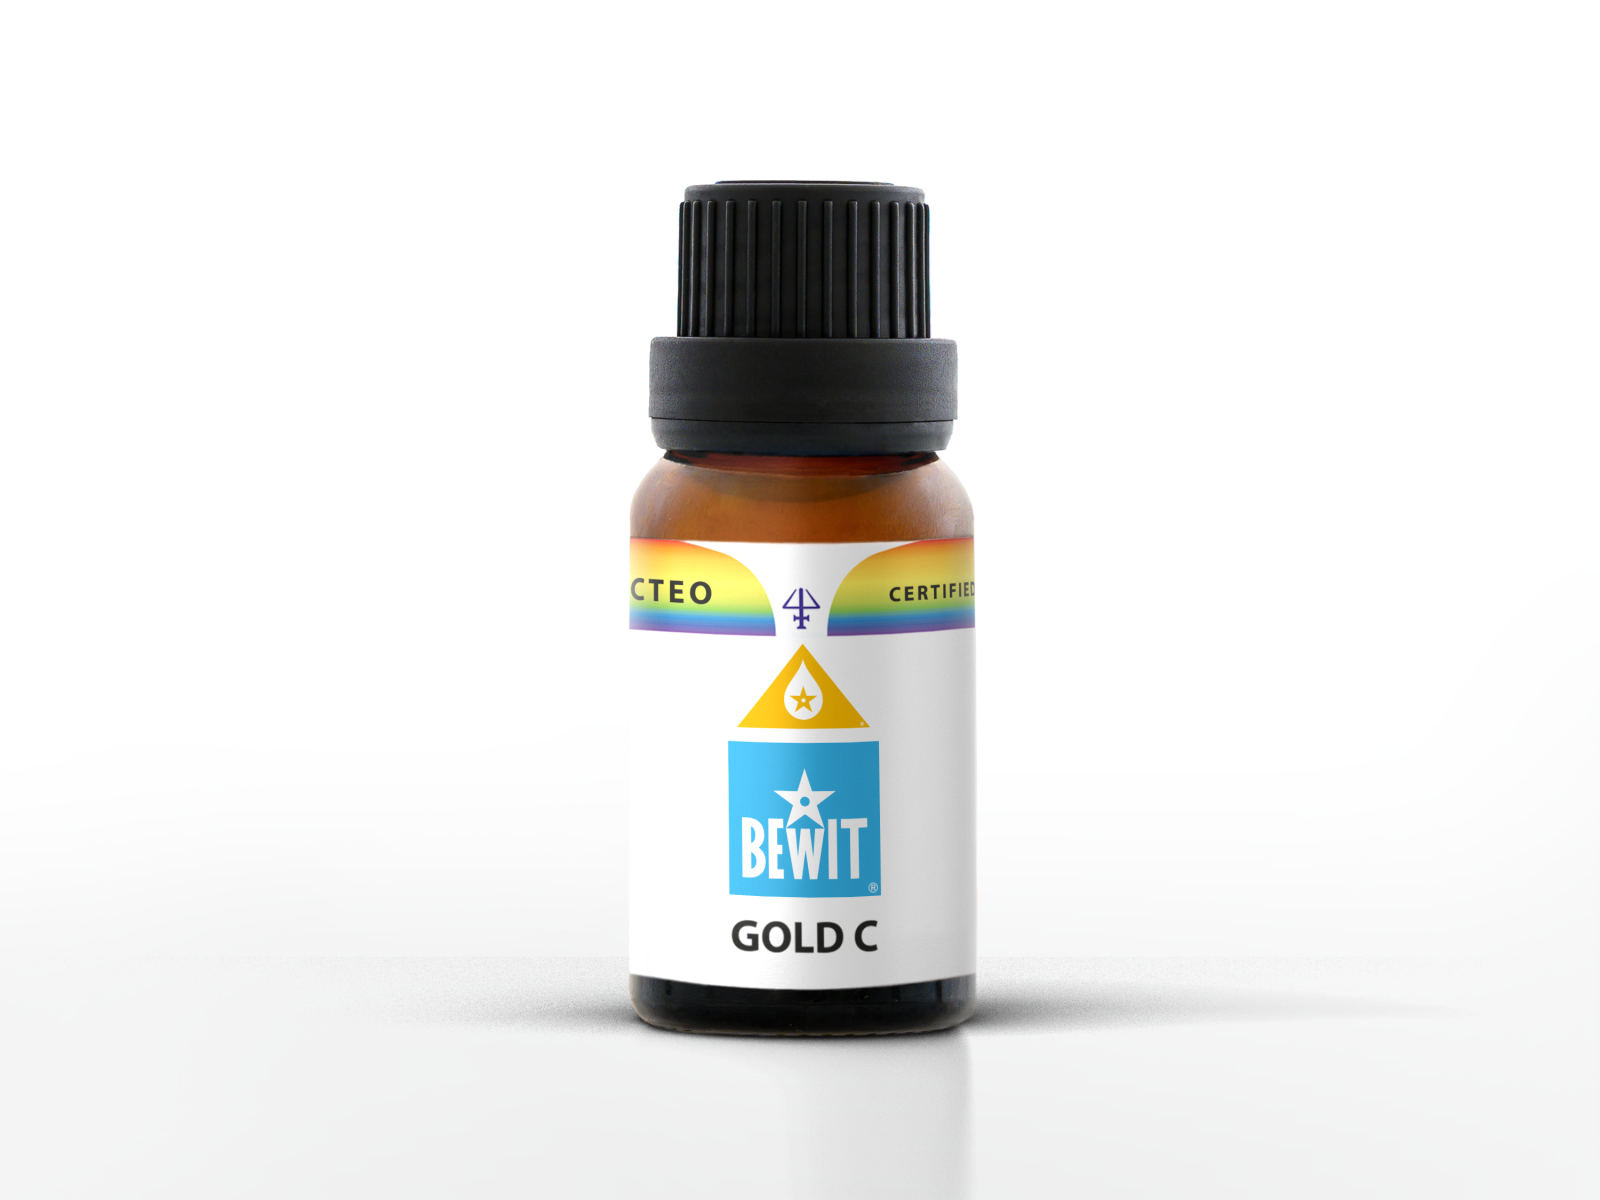 BEWIT GOLD C - Blend of essential oils - 1